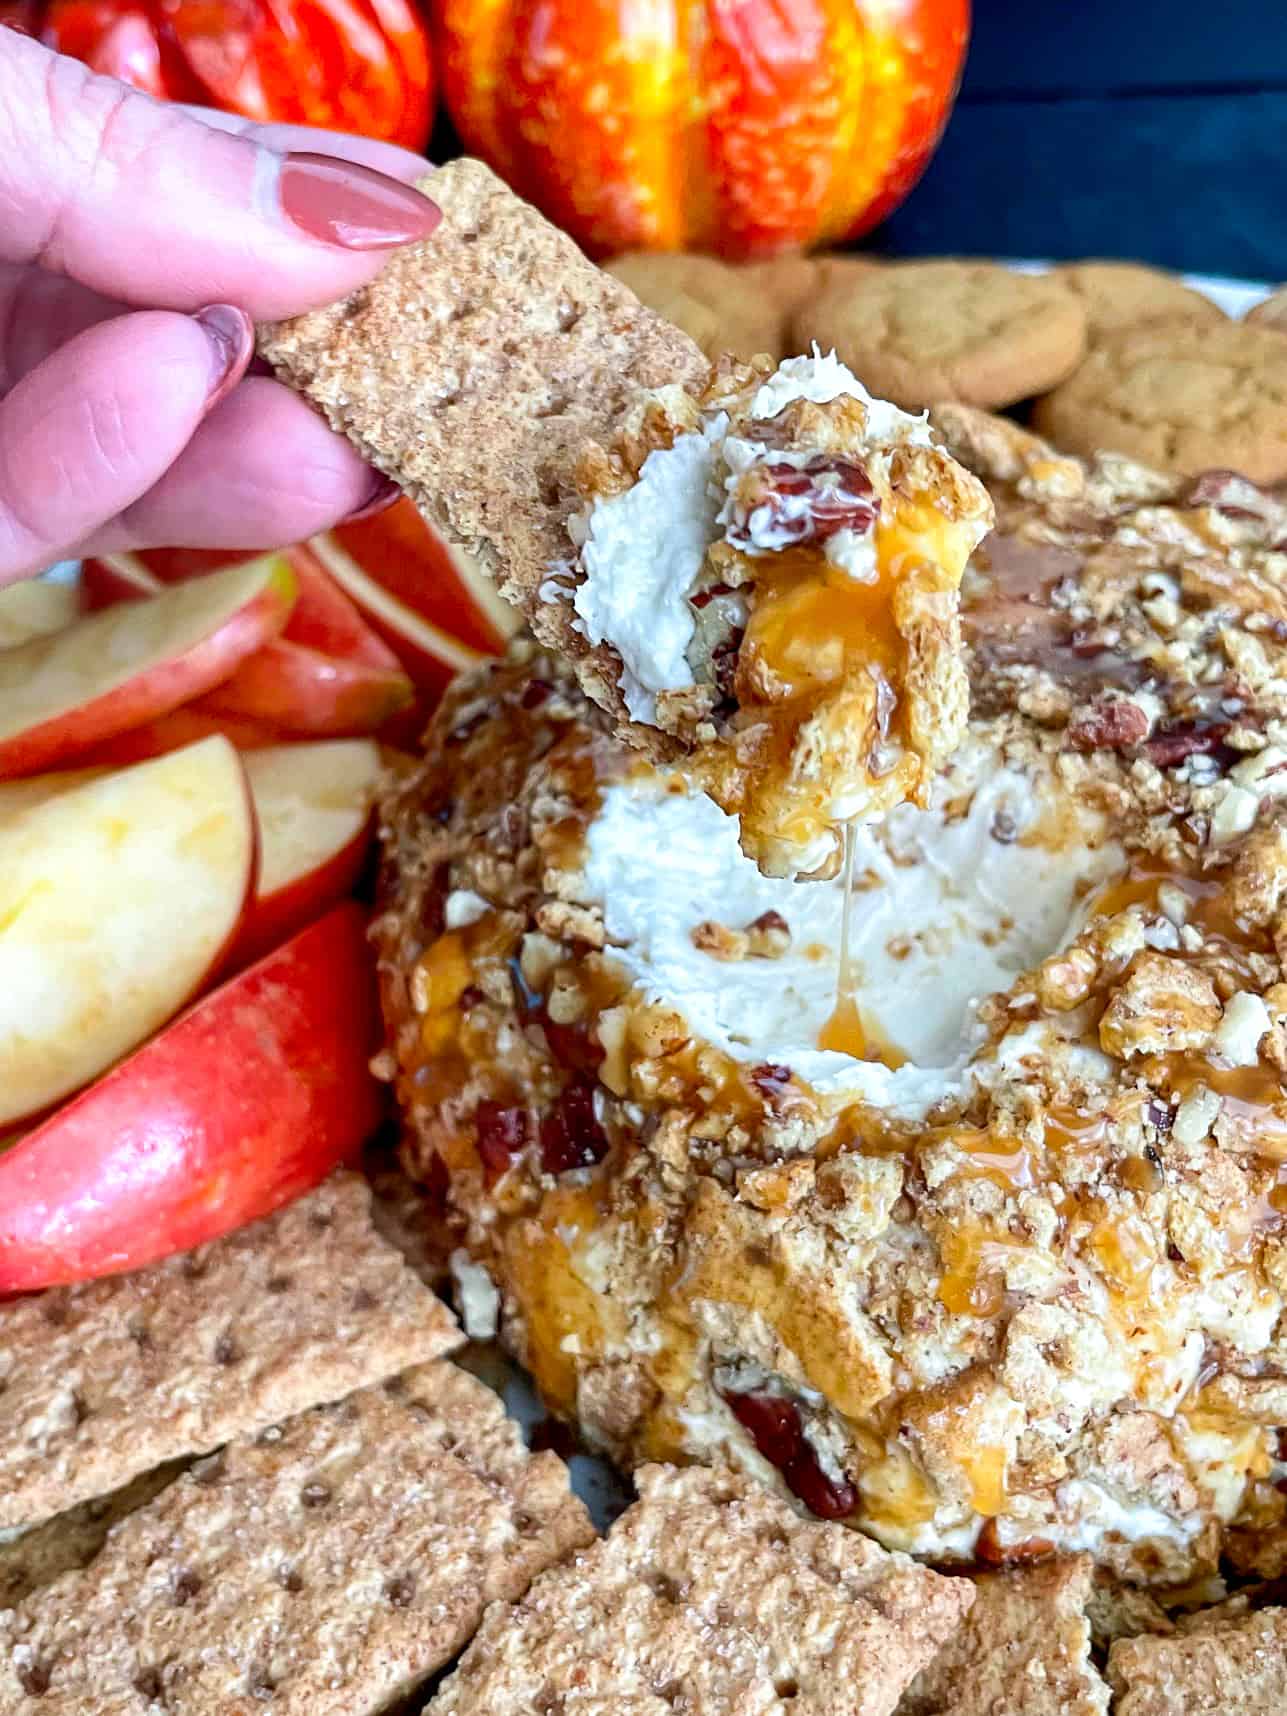 A hand dipping a graham cracker into caramel pecan dessert cheese ball with addtional graham crackers on the side.